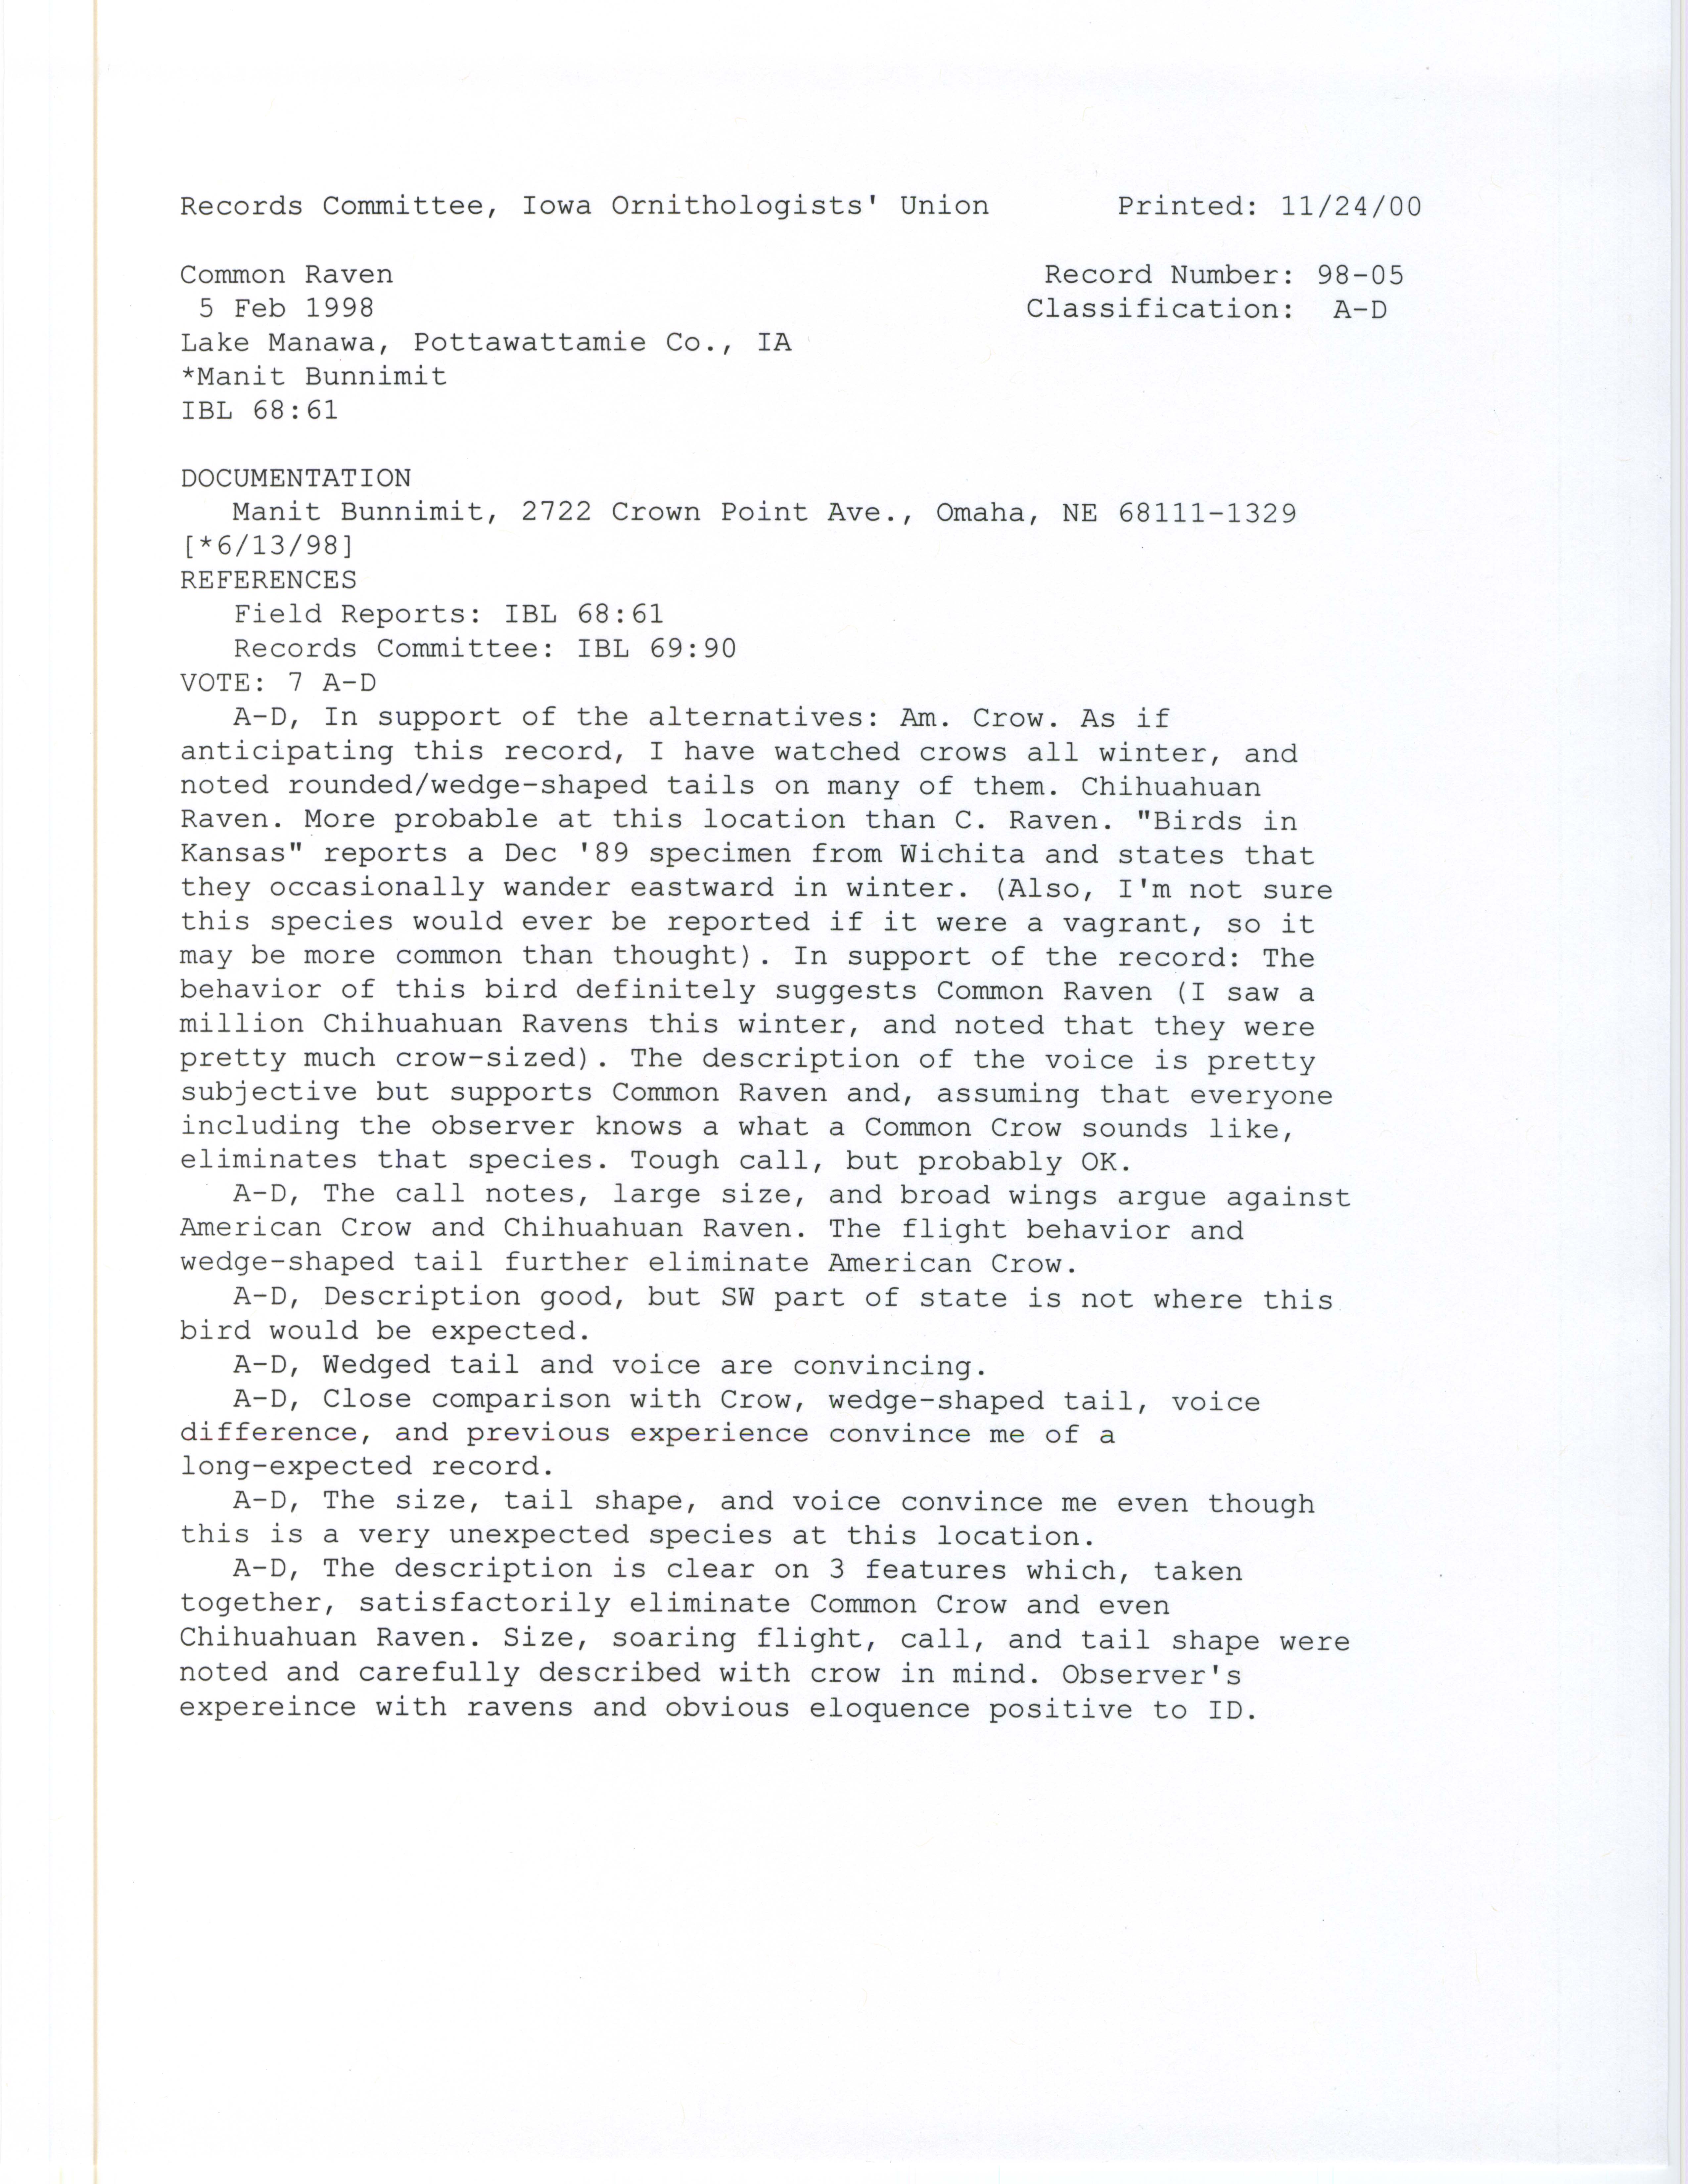 Records Committee review for rare bird sighting for Common Raven at Lake Manawa State Park, 1998